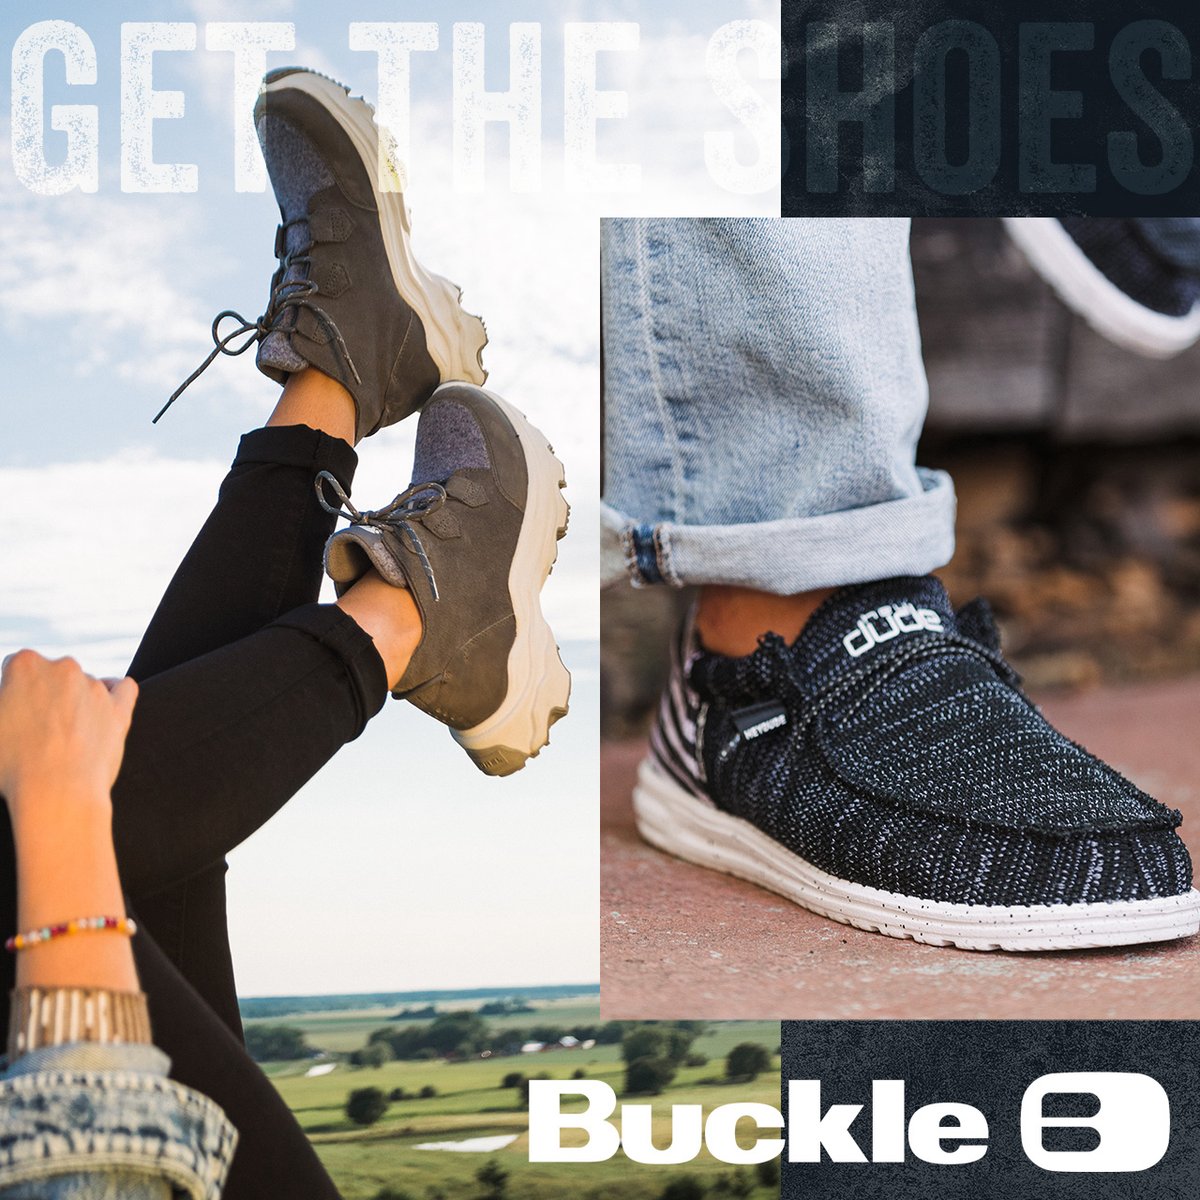 Stop by @Buckle to Get The Shoes! 👟 Good style, one step at a time! 👟